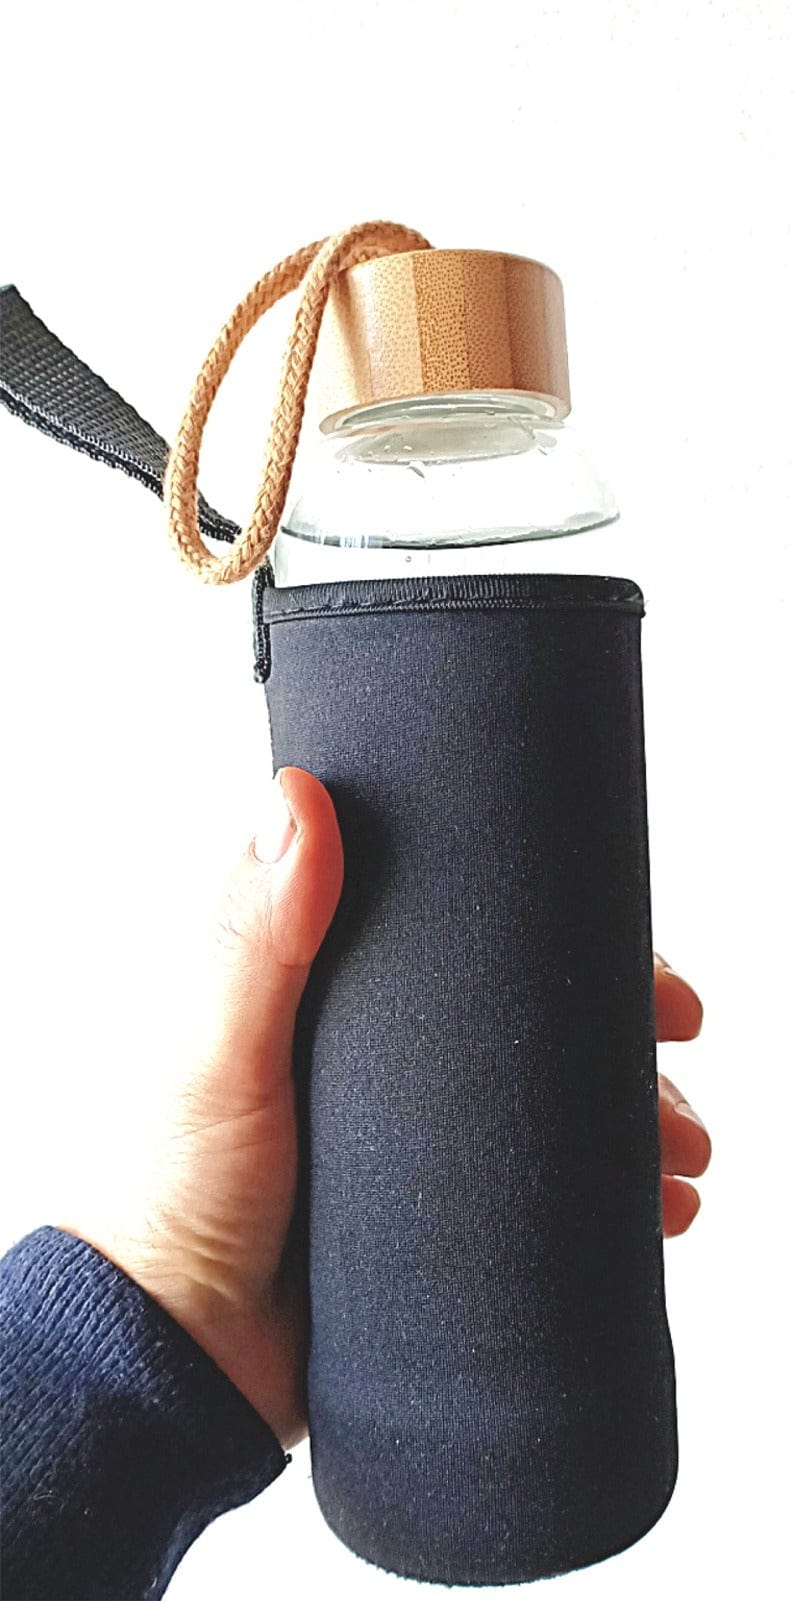 Computerized water bottle with natural bamboo and glass stones – TENET